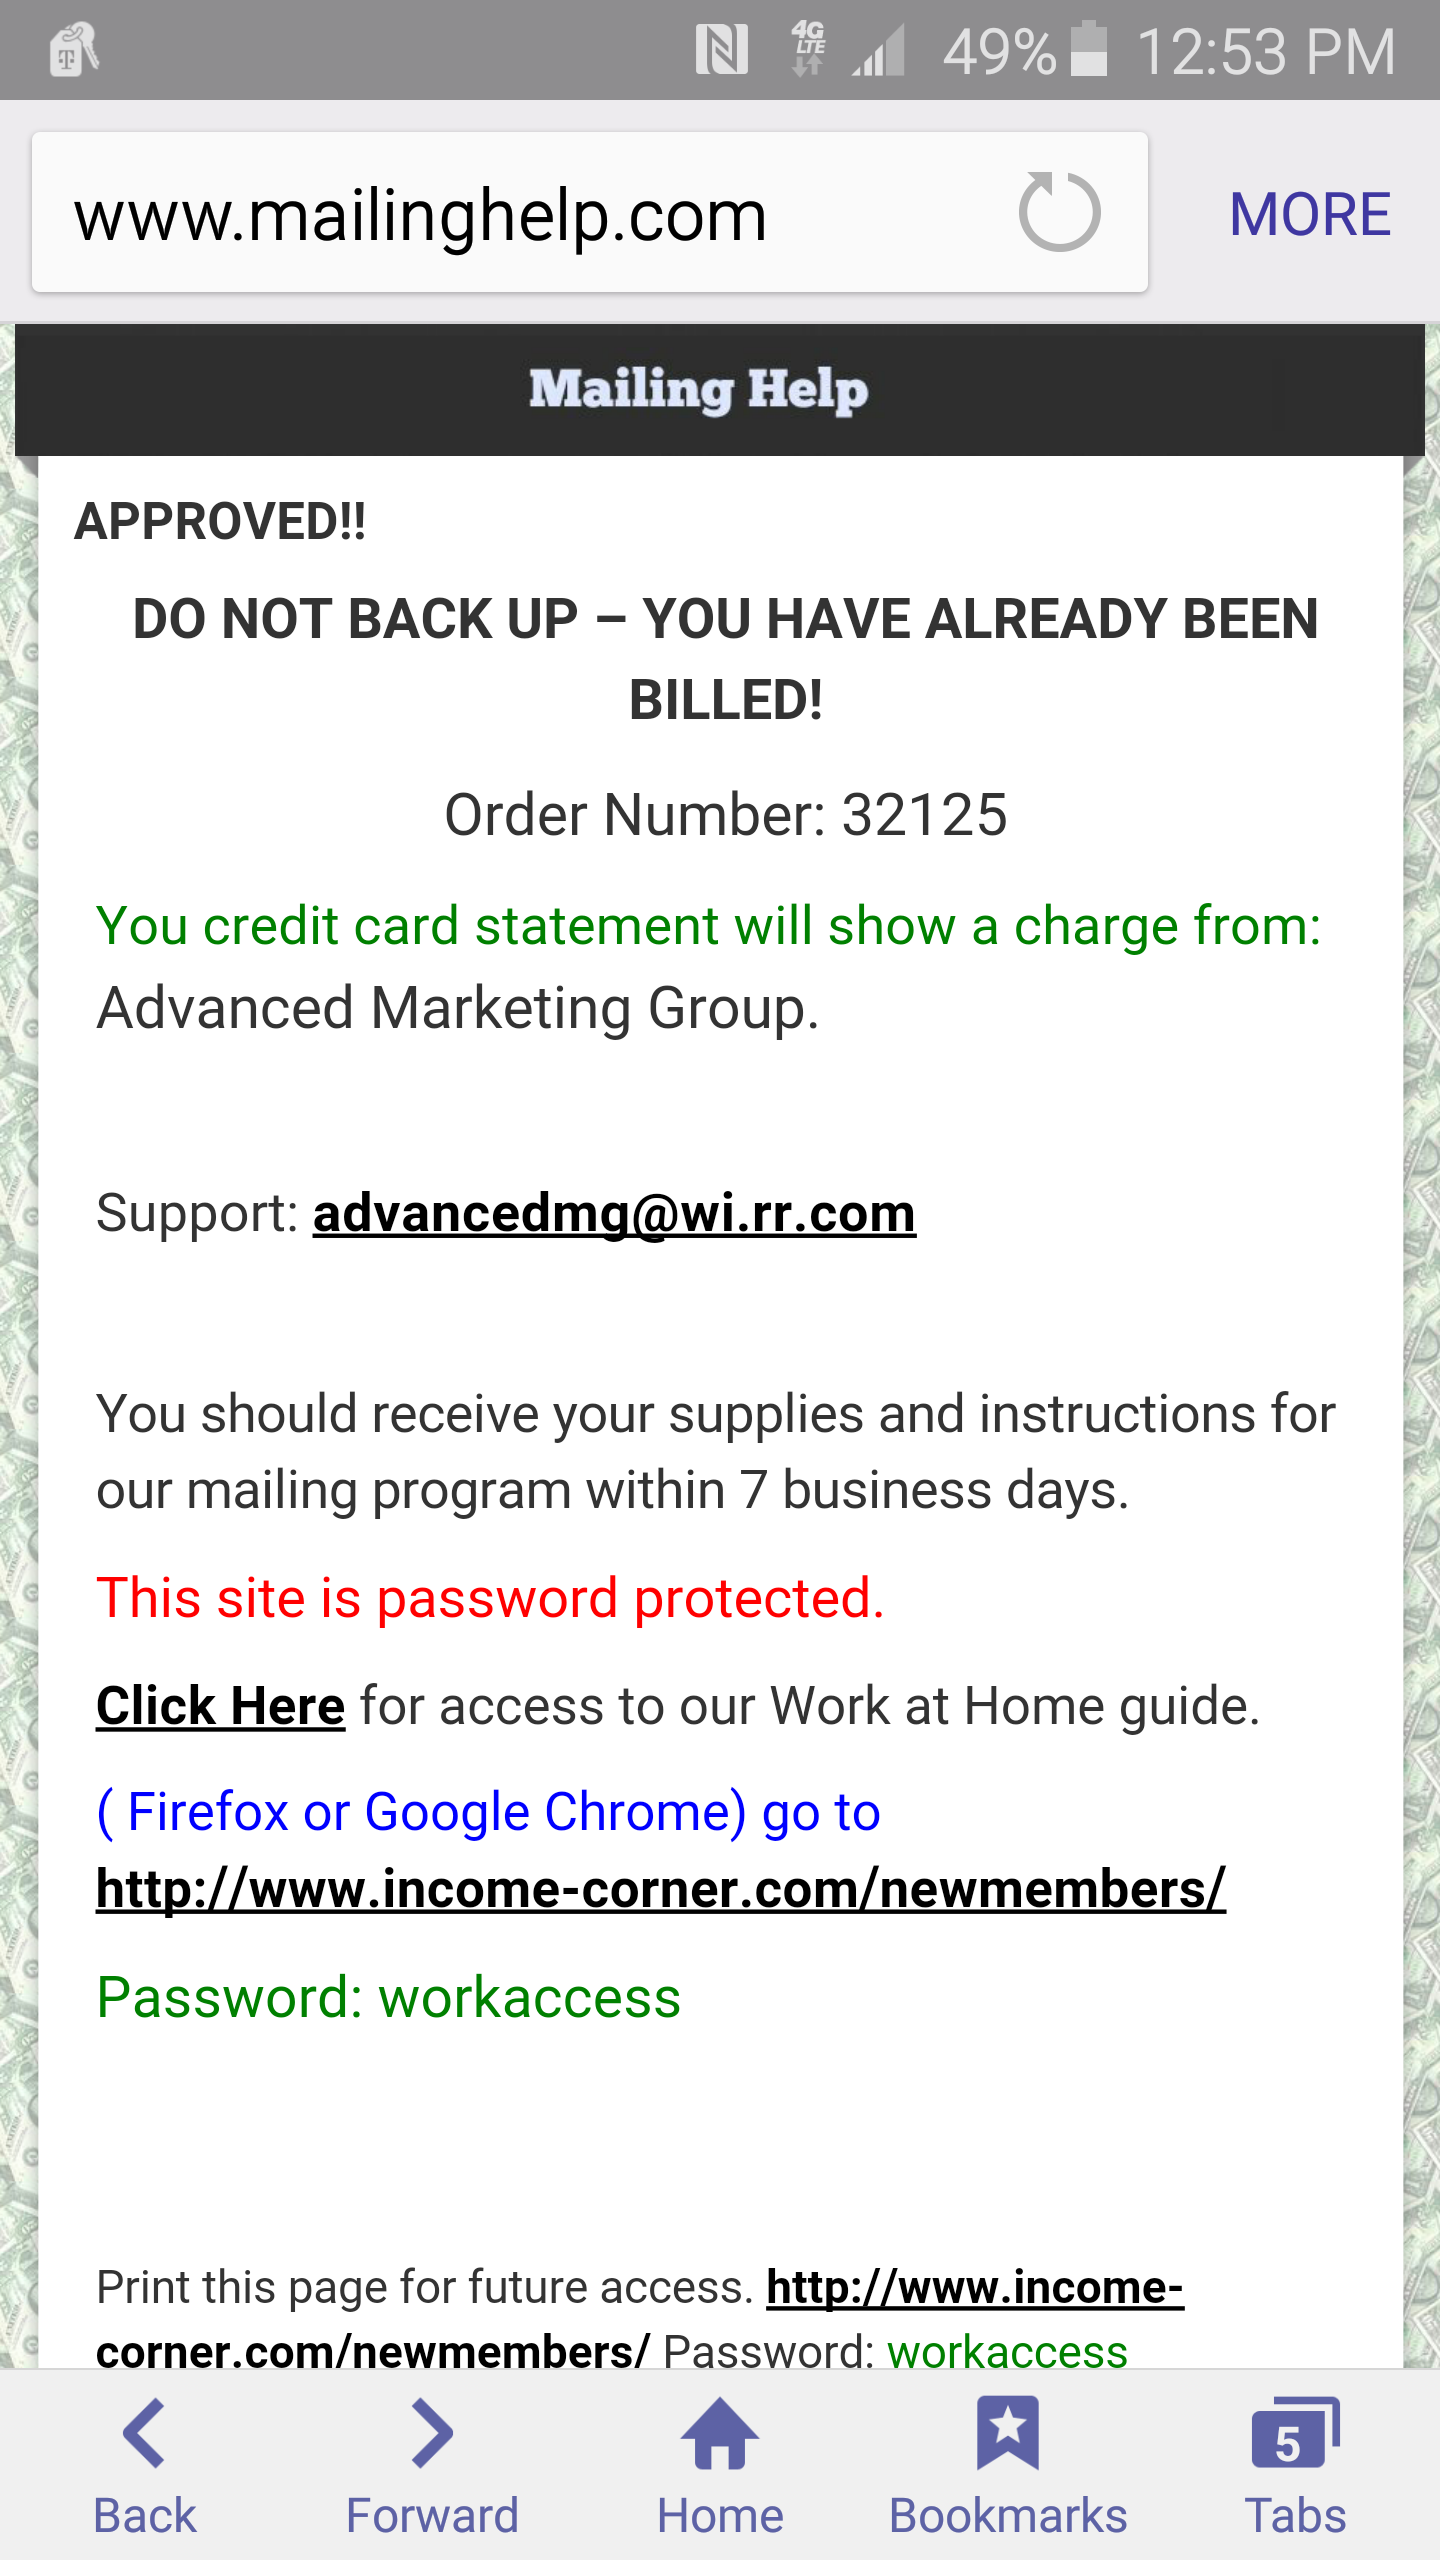 This is the confirmation  page on the website www.mailinghelp.com once you make your payment